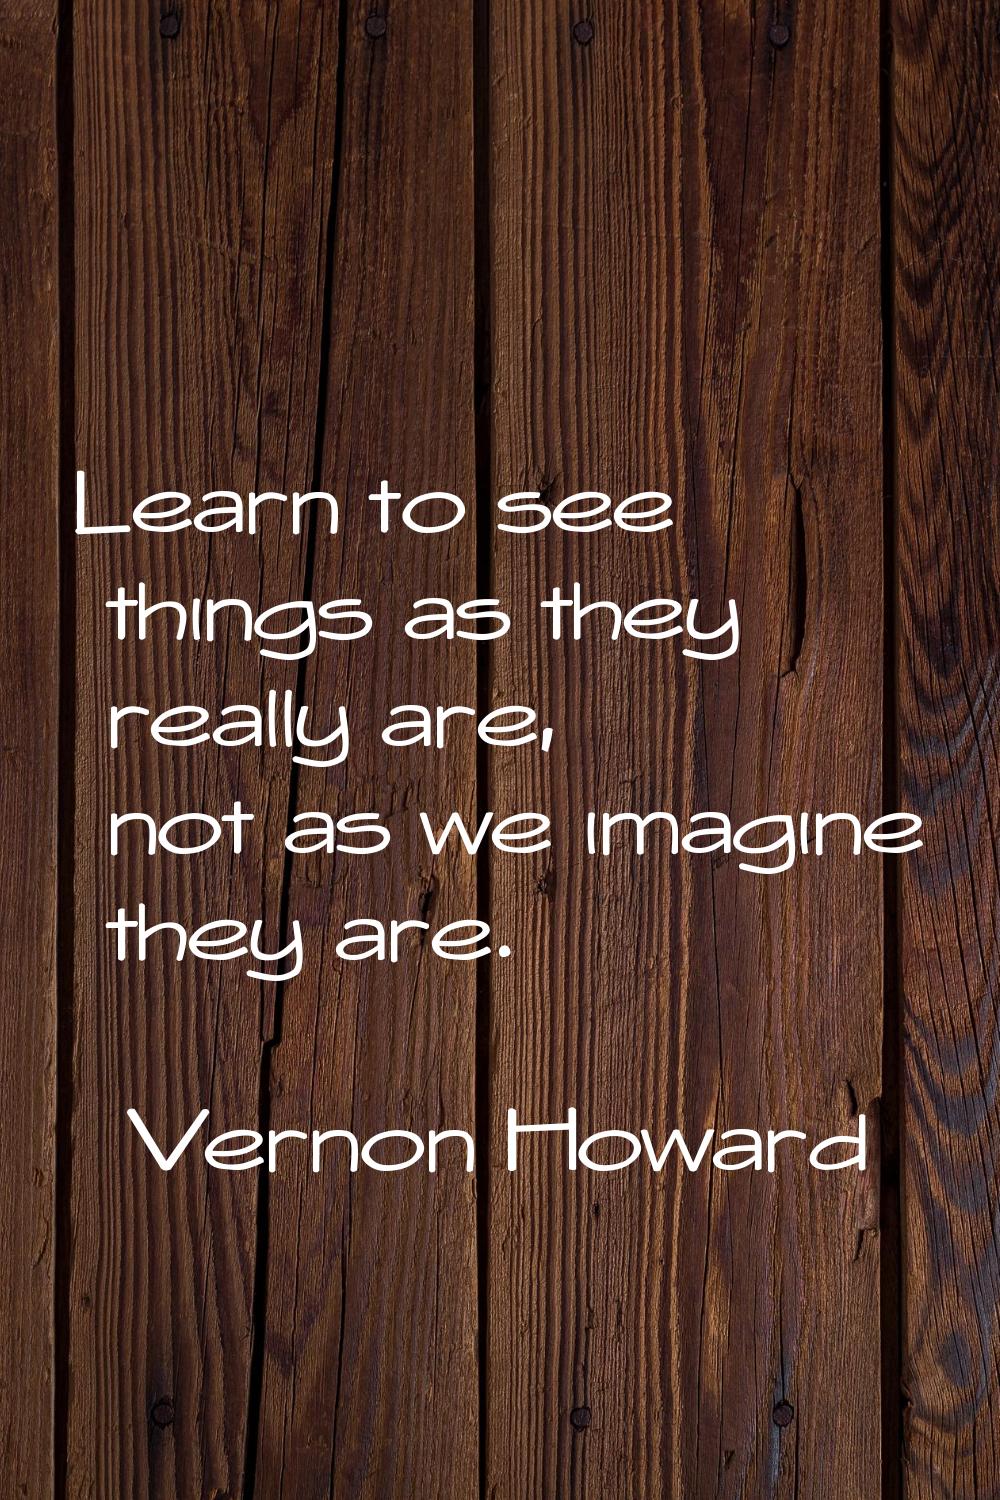 Learn to see things as they really are, not as we imagine they are.